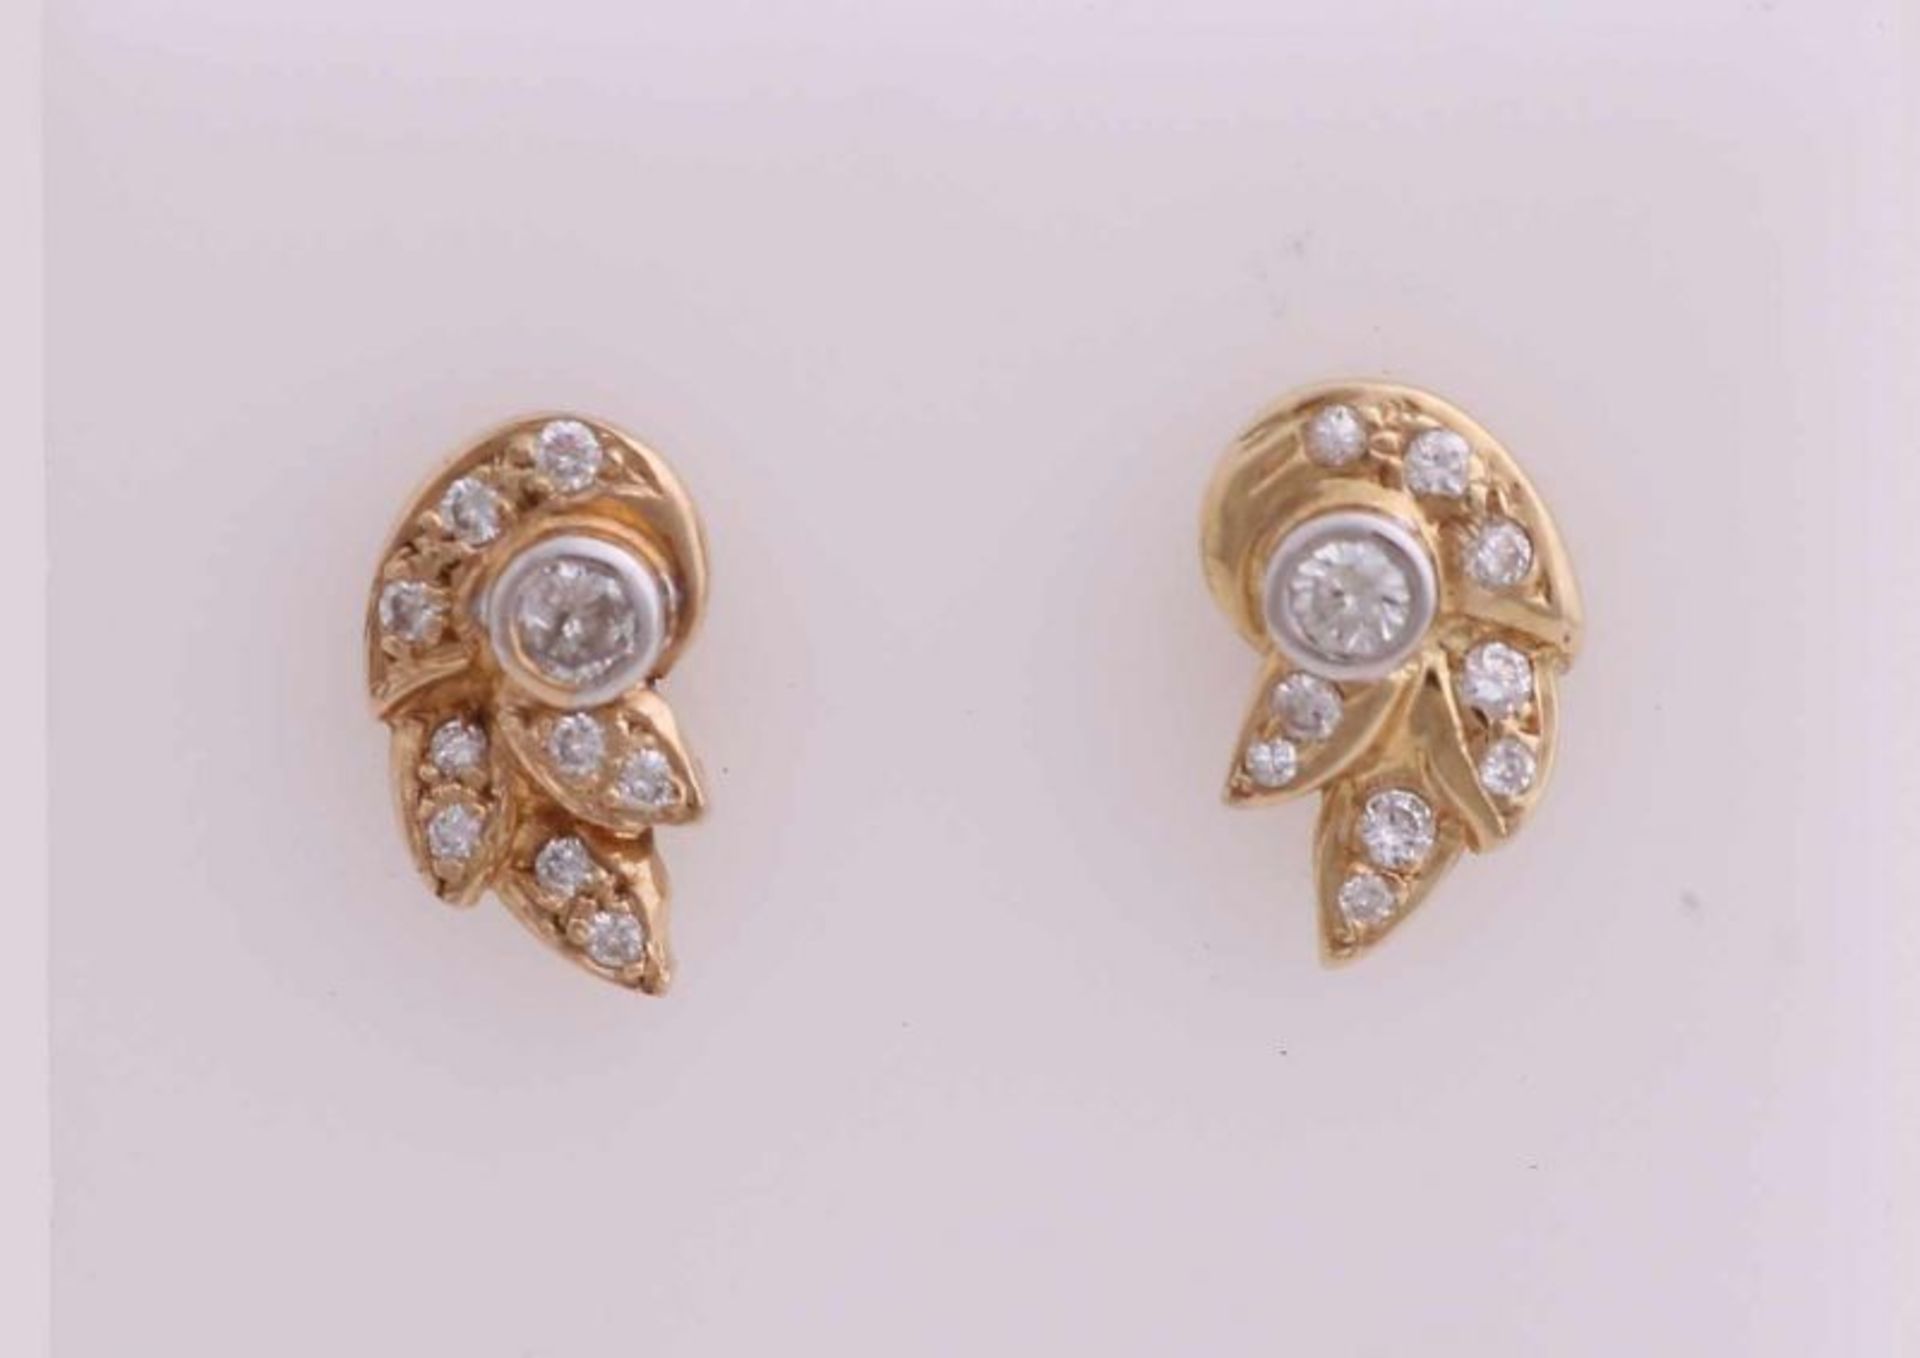 Ornate golden earrings, 585/000, with diamond. Studs in the form of a leaf vibrate with various